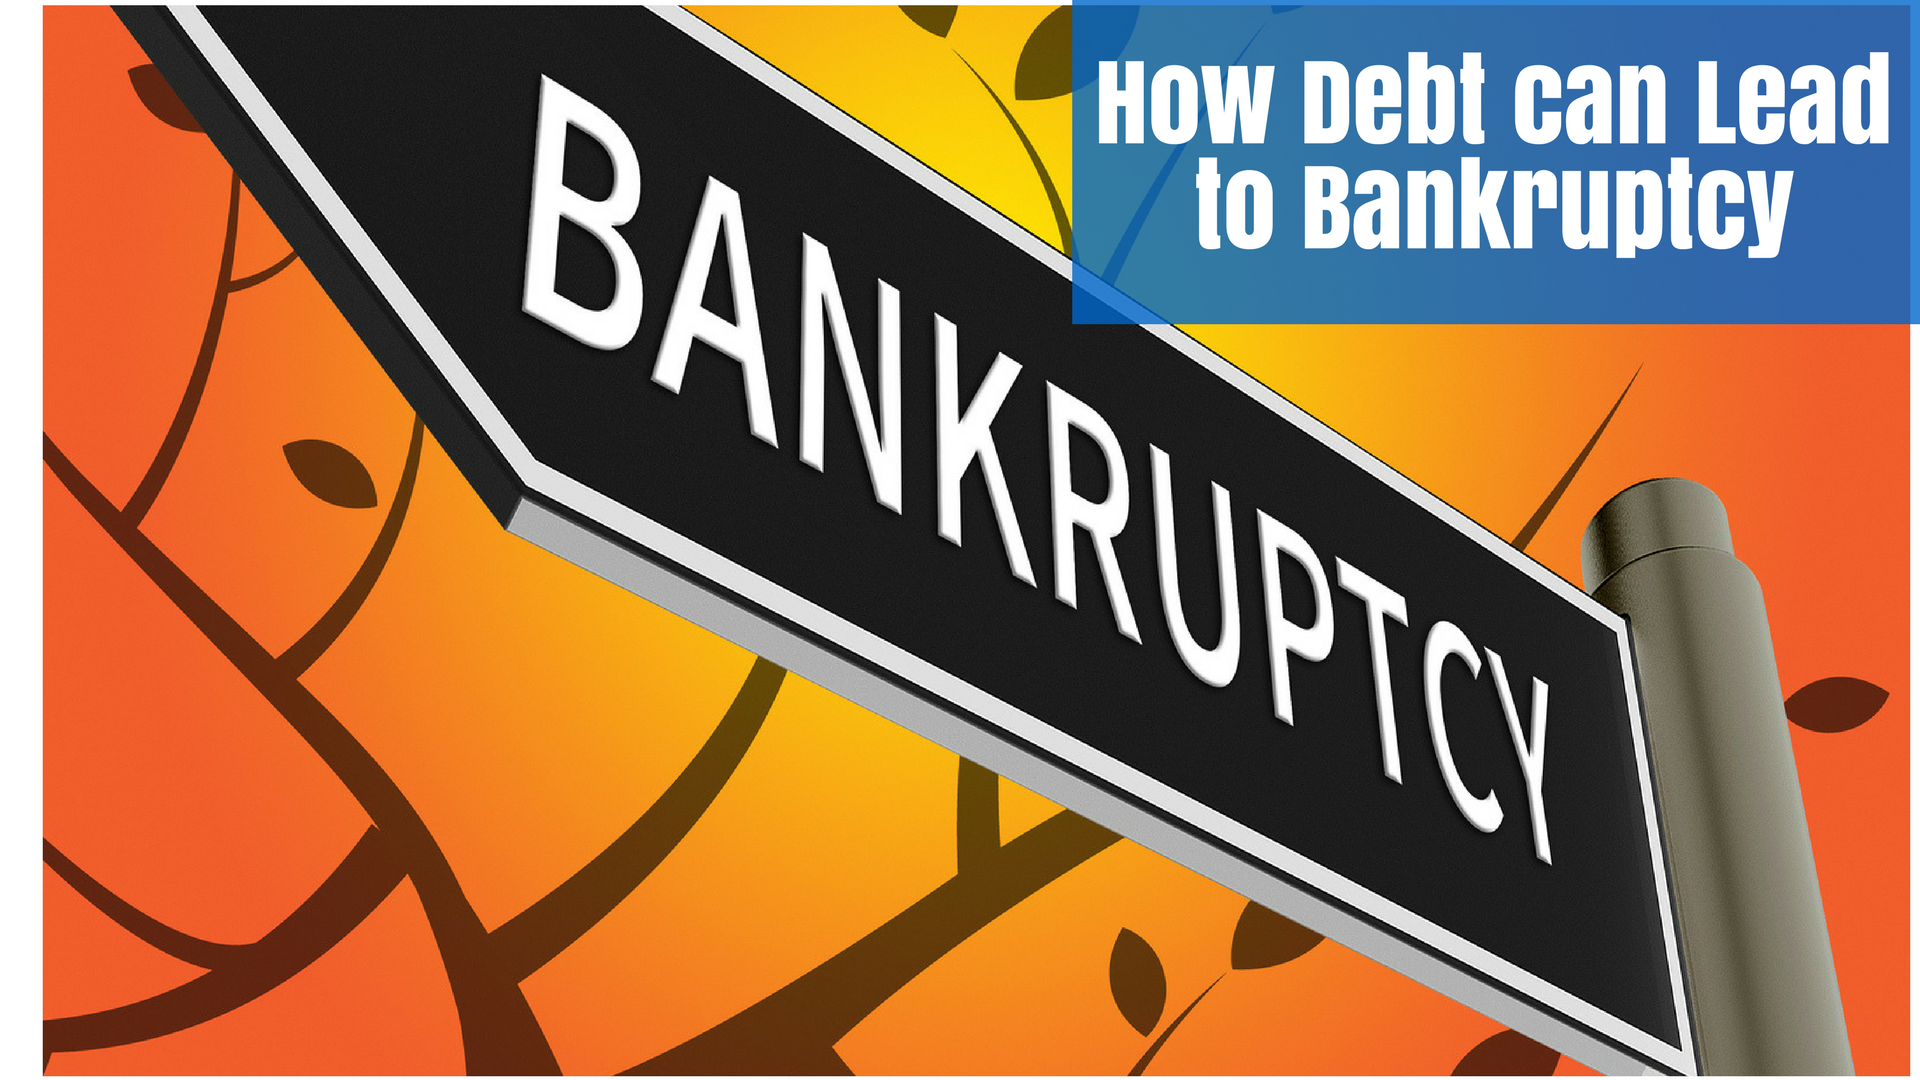 HOW DEBT CAN LEAD TO BANKRUPTCY?